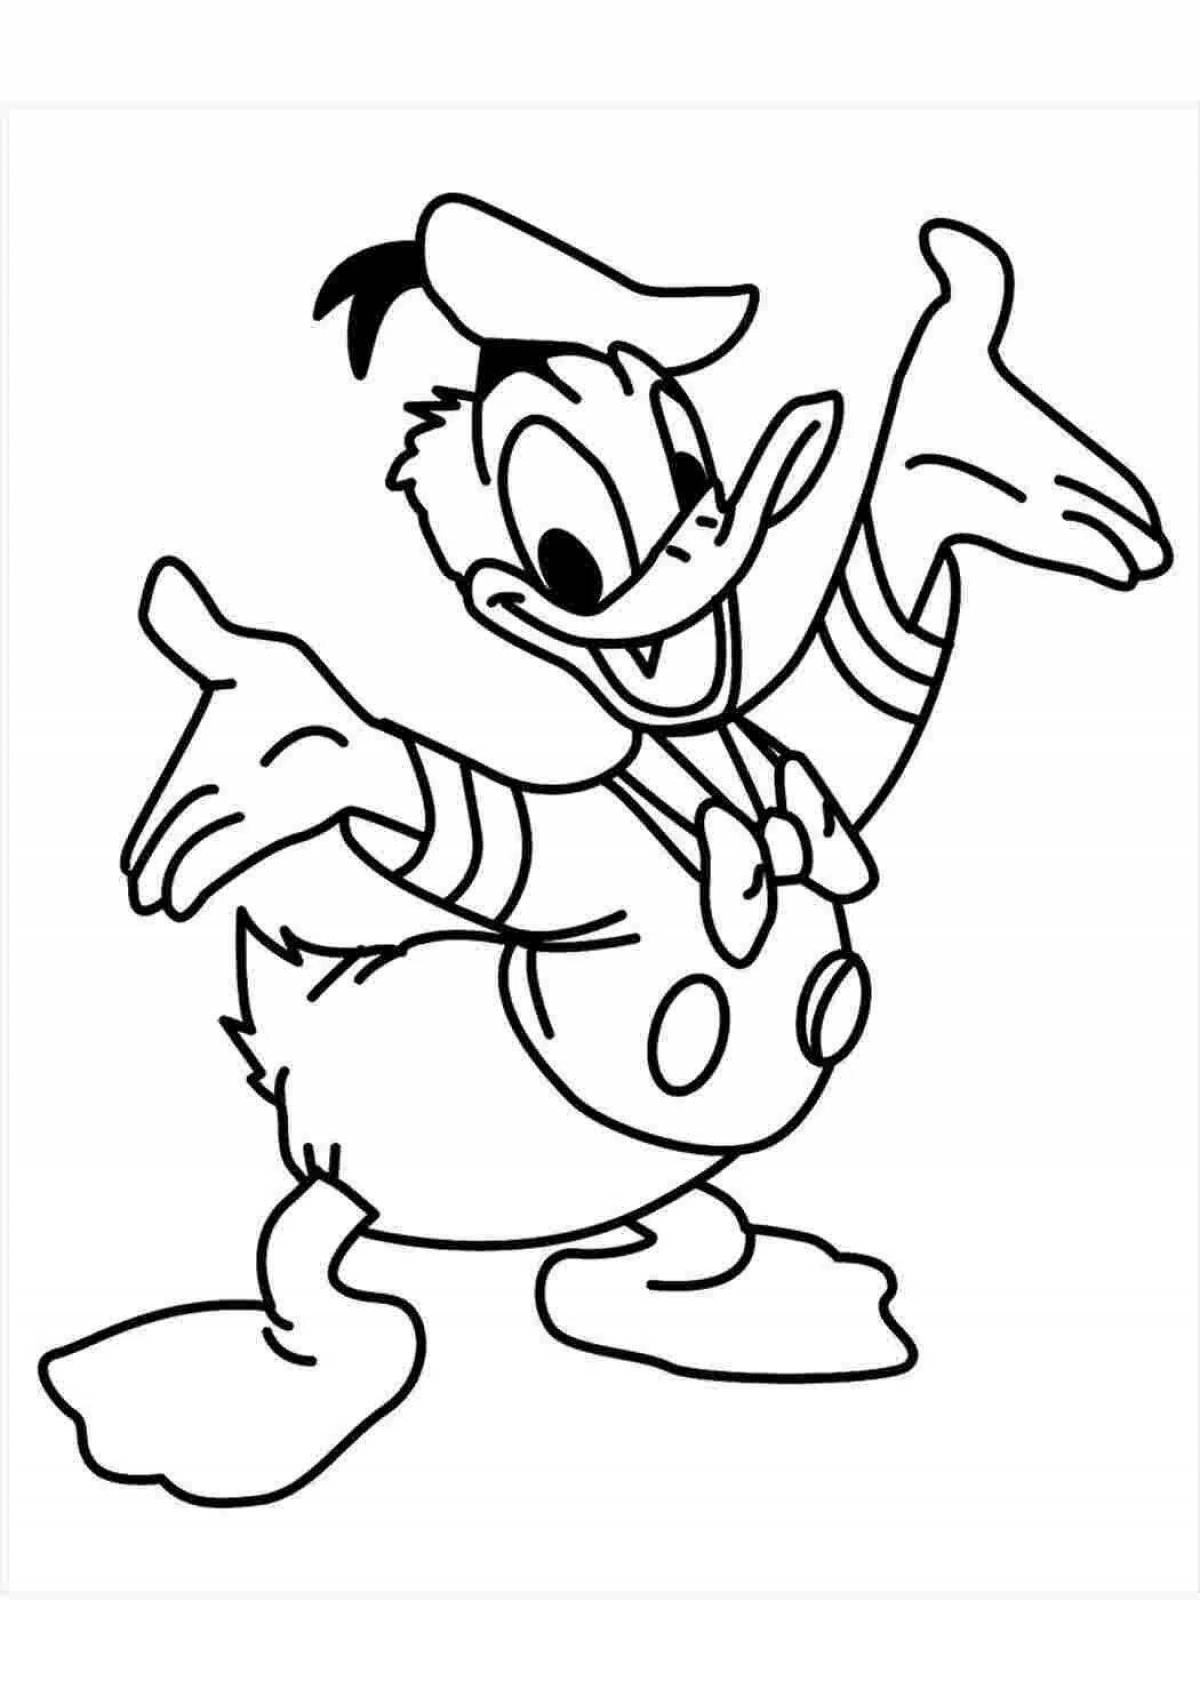 Coloring page with a playful cartoon character